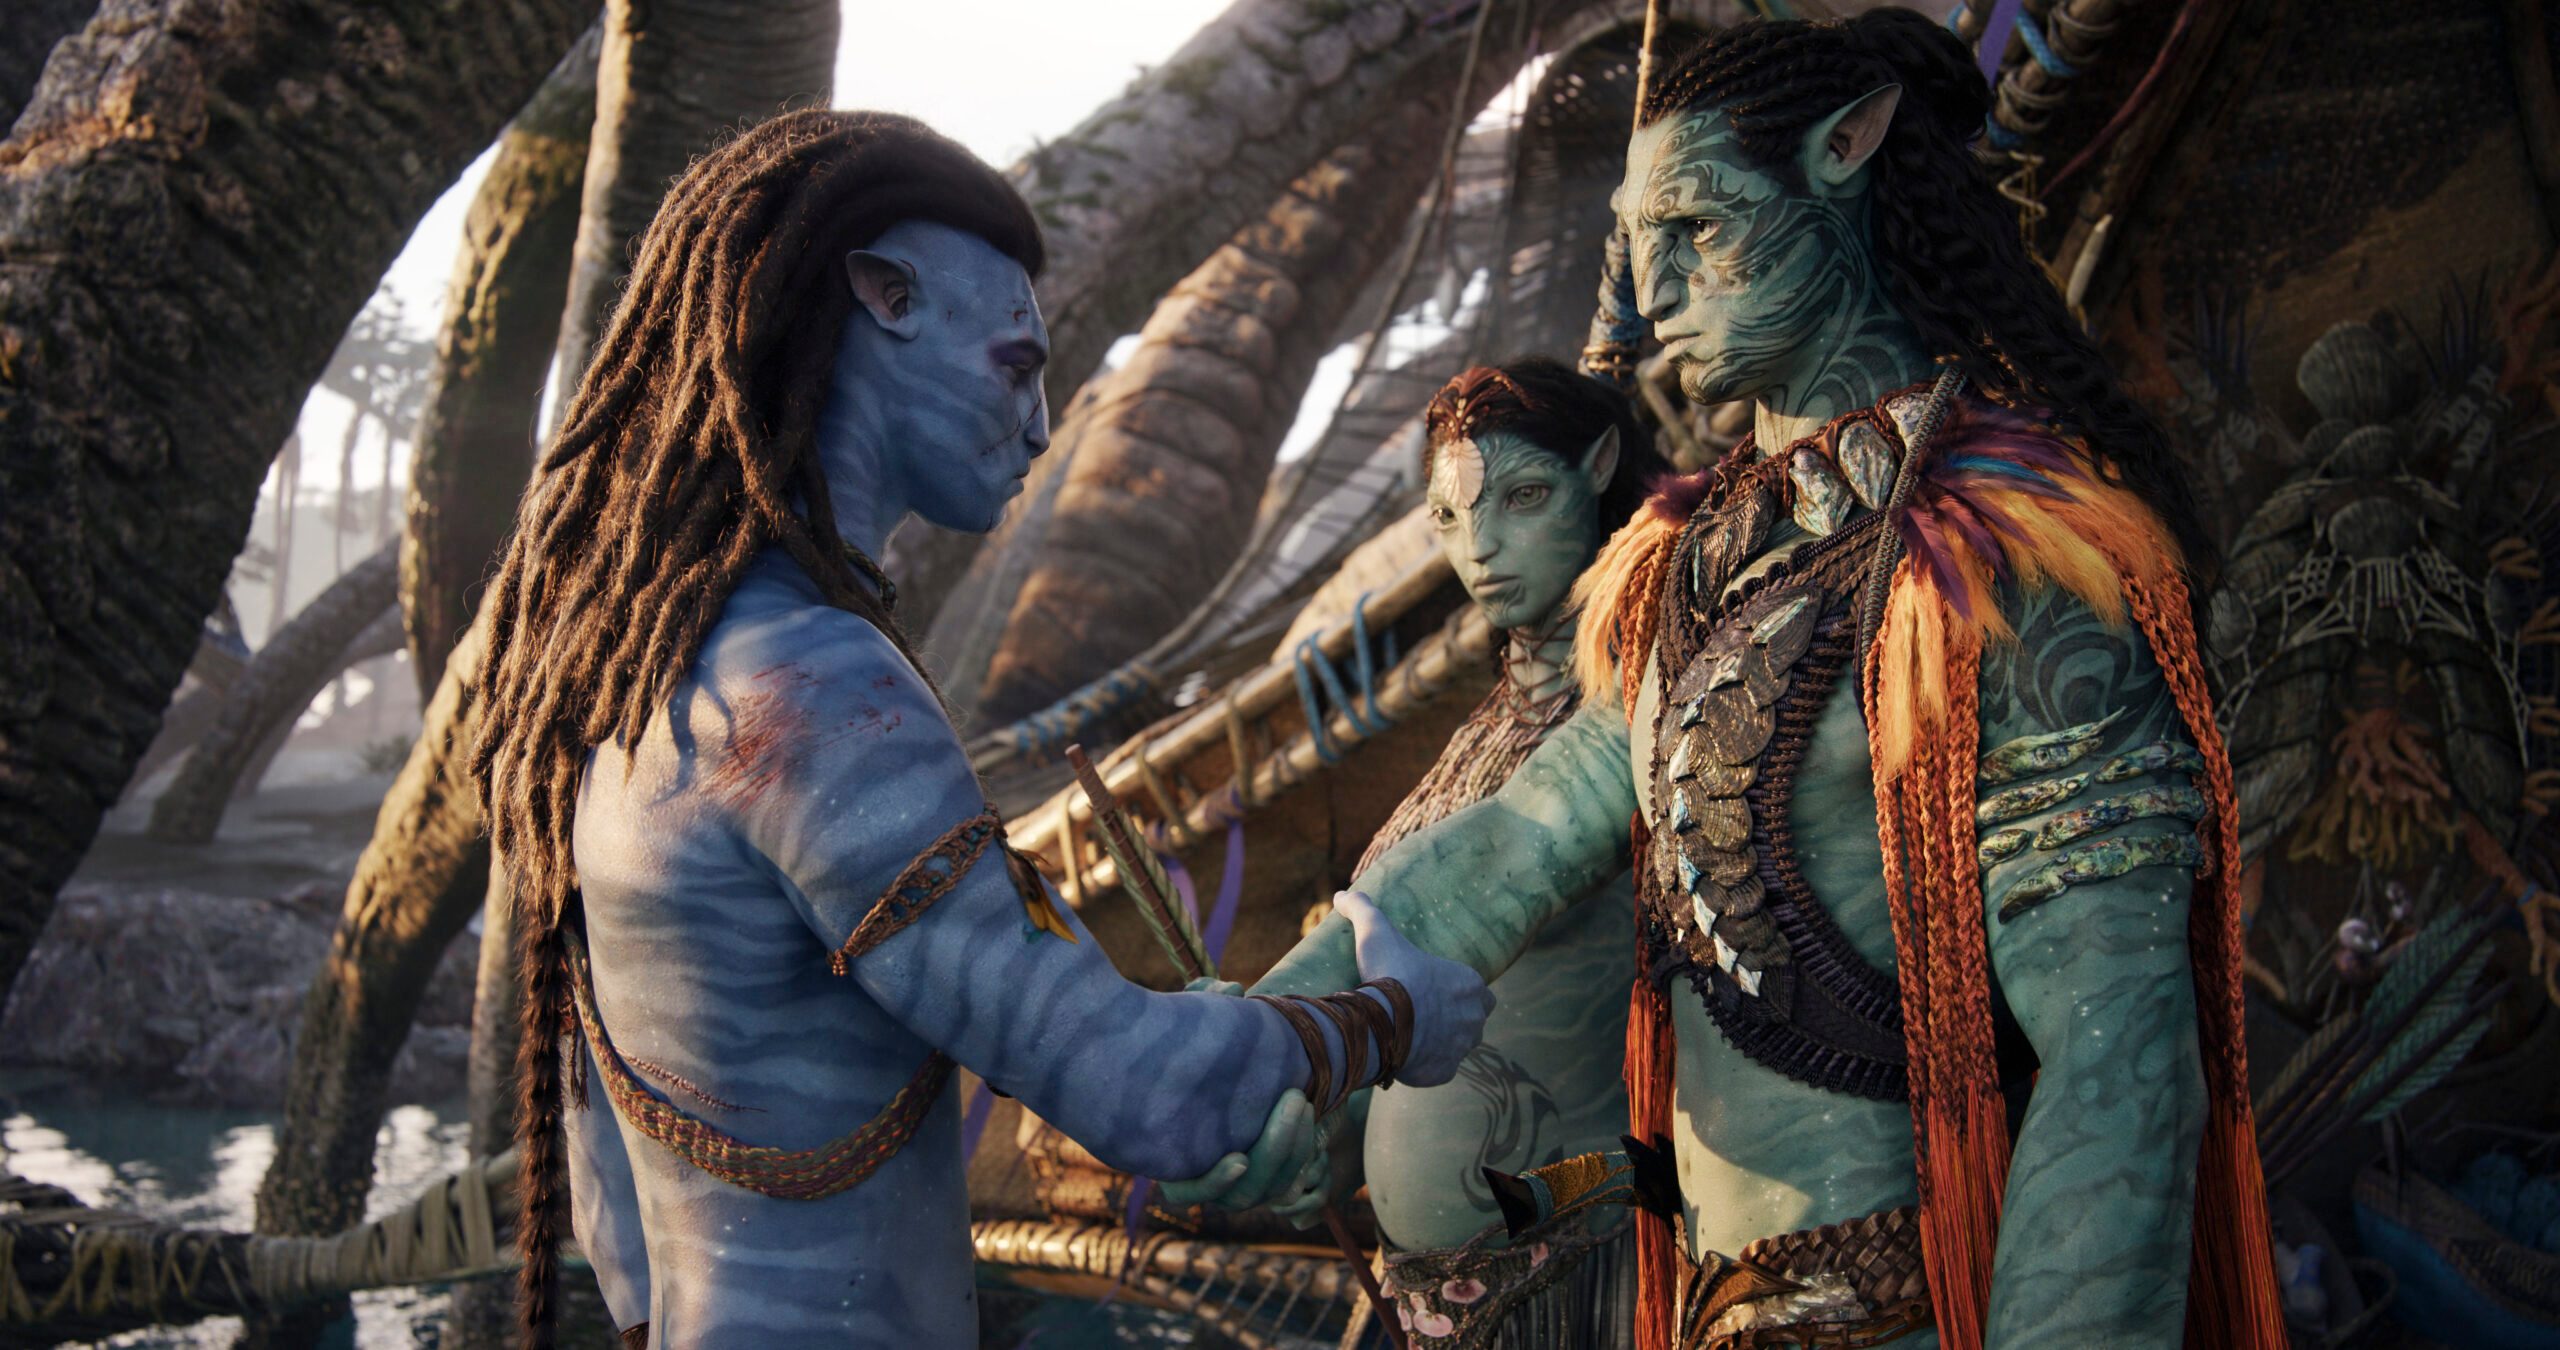 Expensive ‘Avatar’ sequel ‘Way of Water’ faces transformed movie market